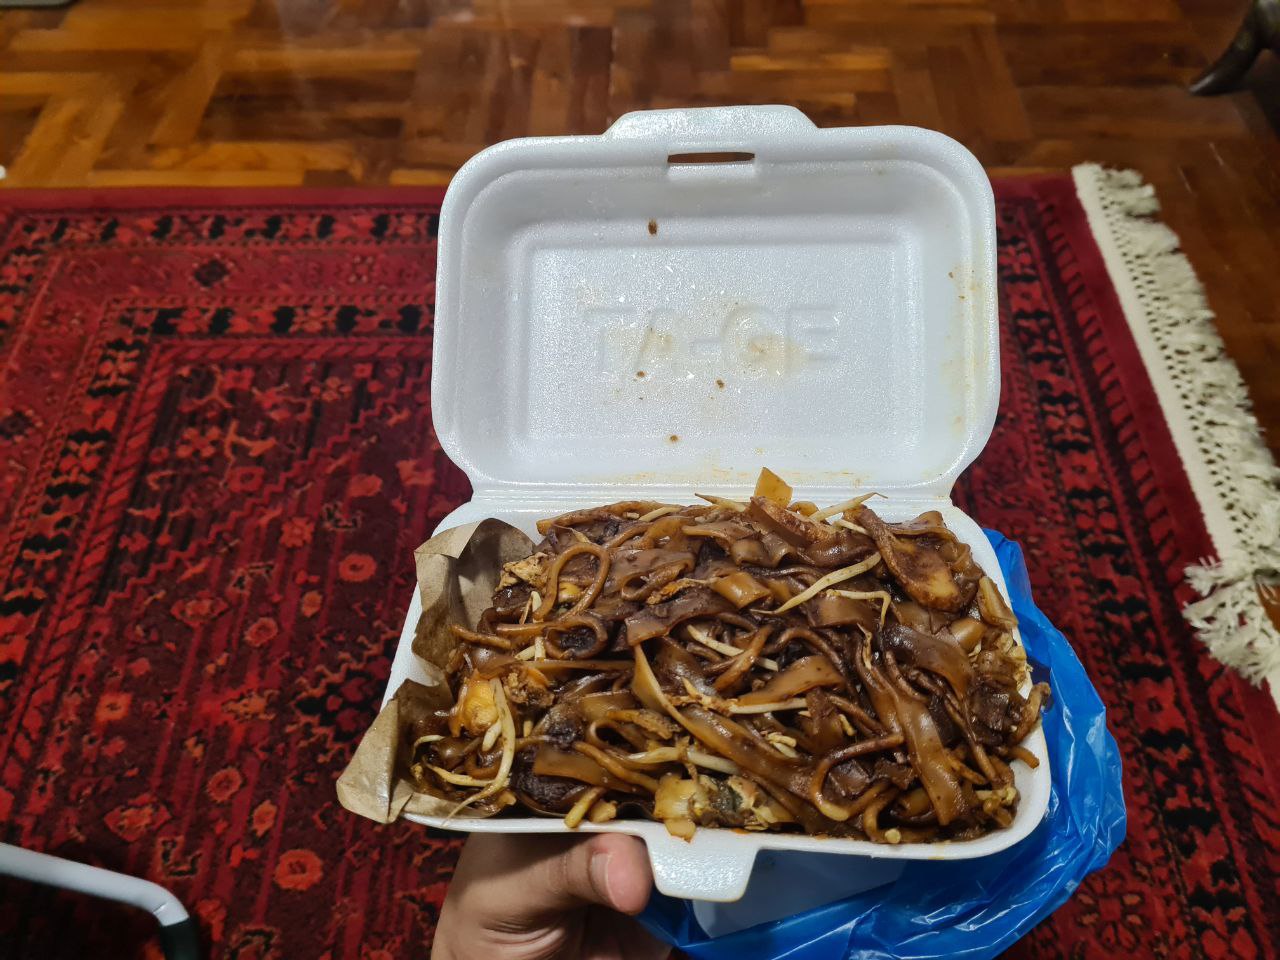 786 Char Kway Teow - Large Char Kway Teow